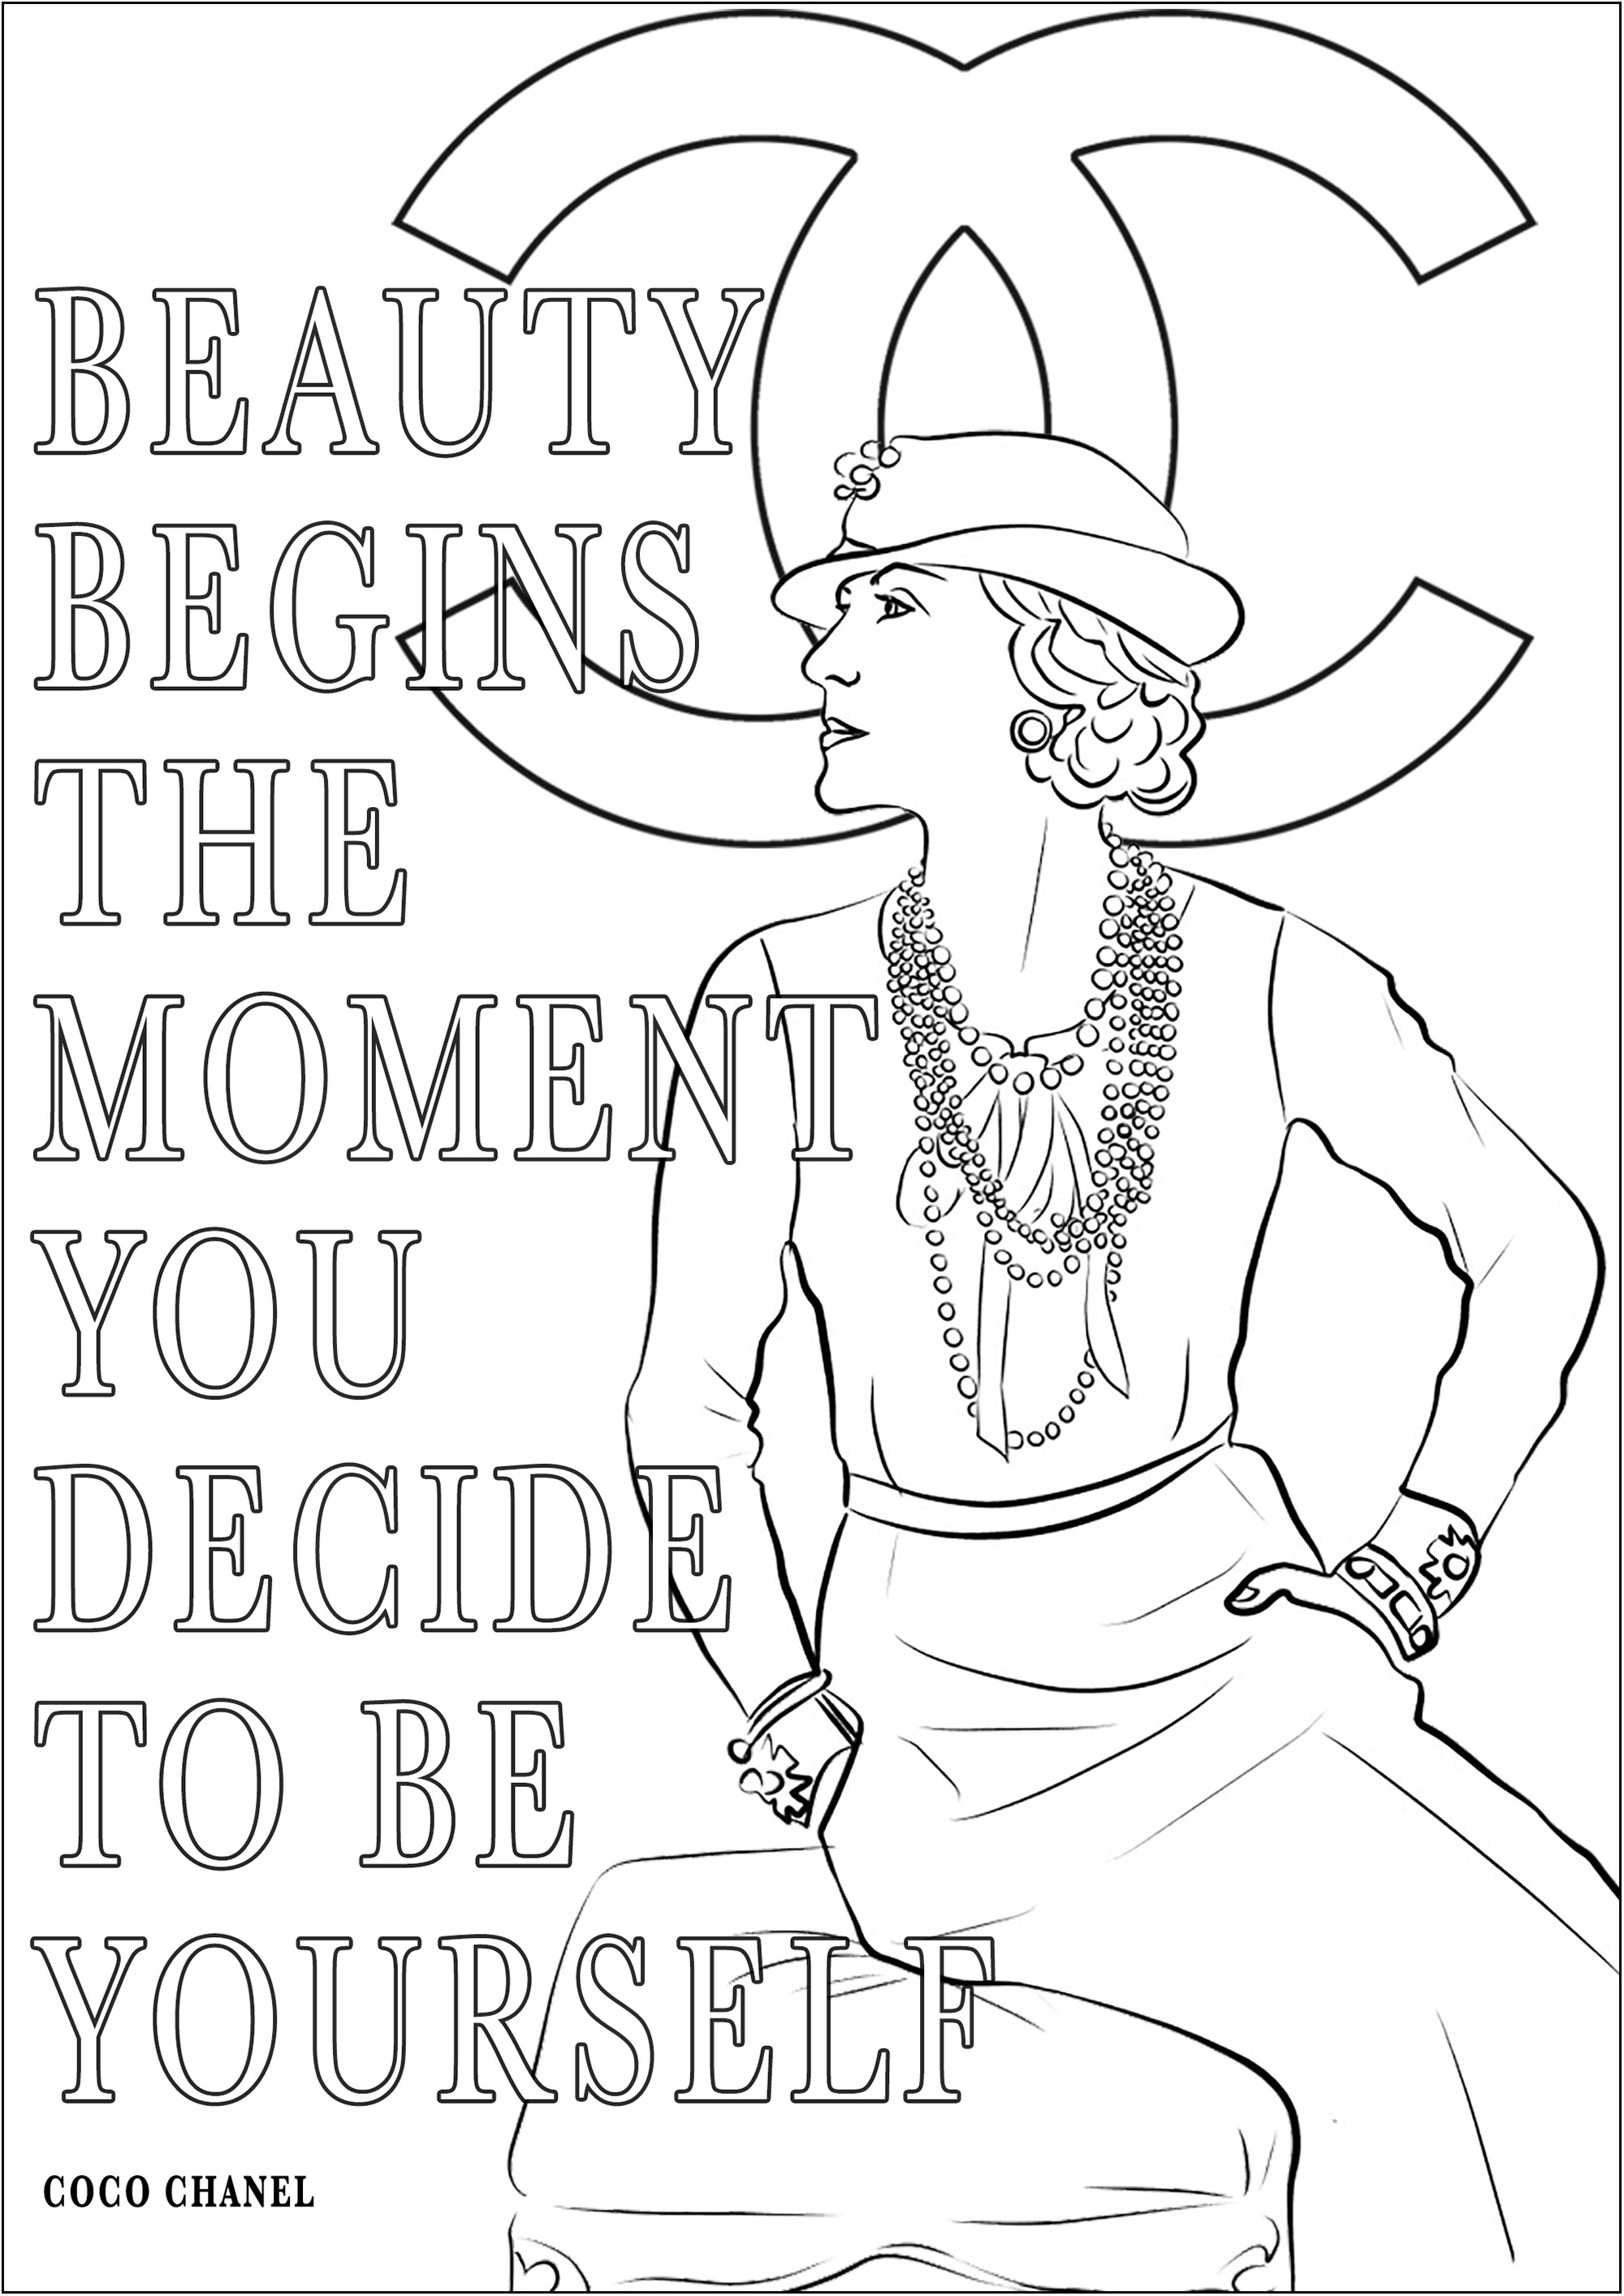 Coco chanel and his quote beauty begins the moment you decide to be yourself